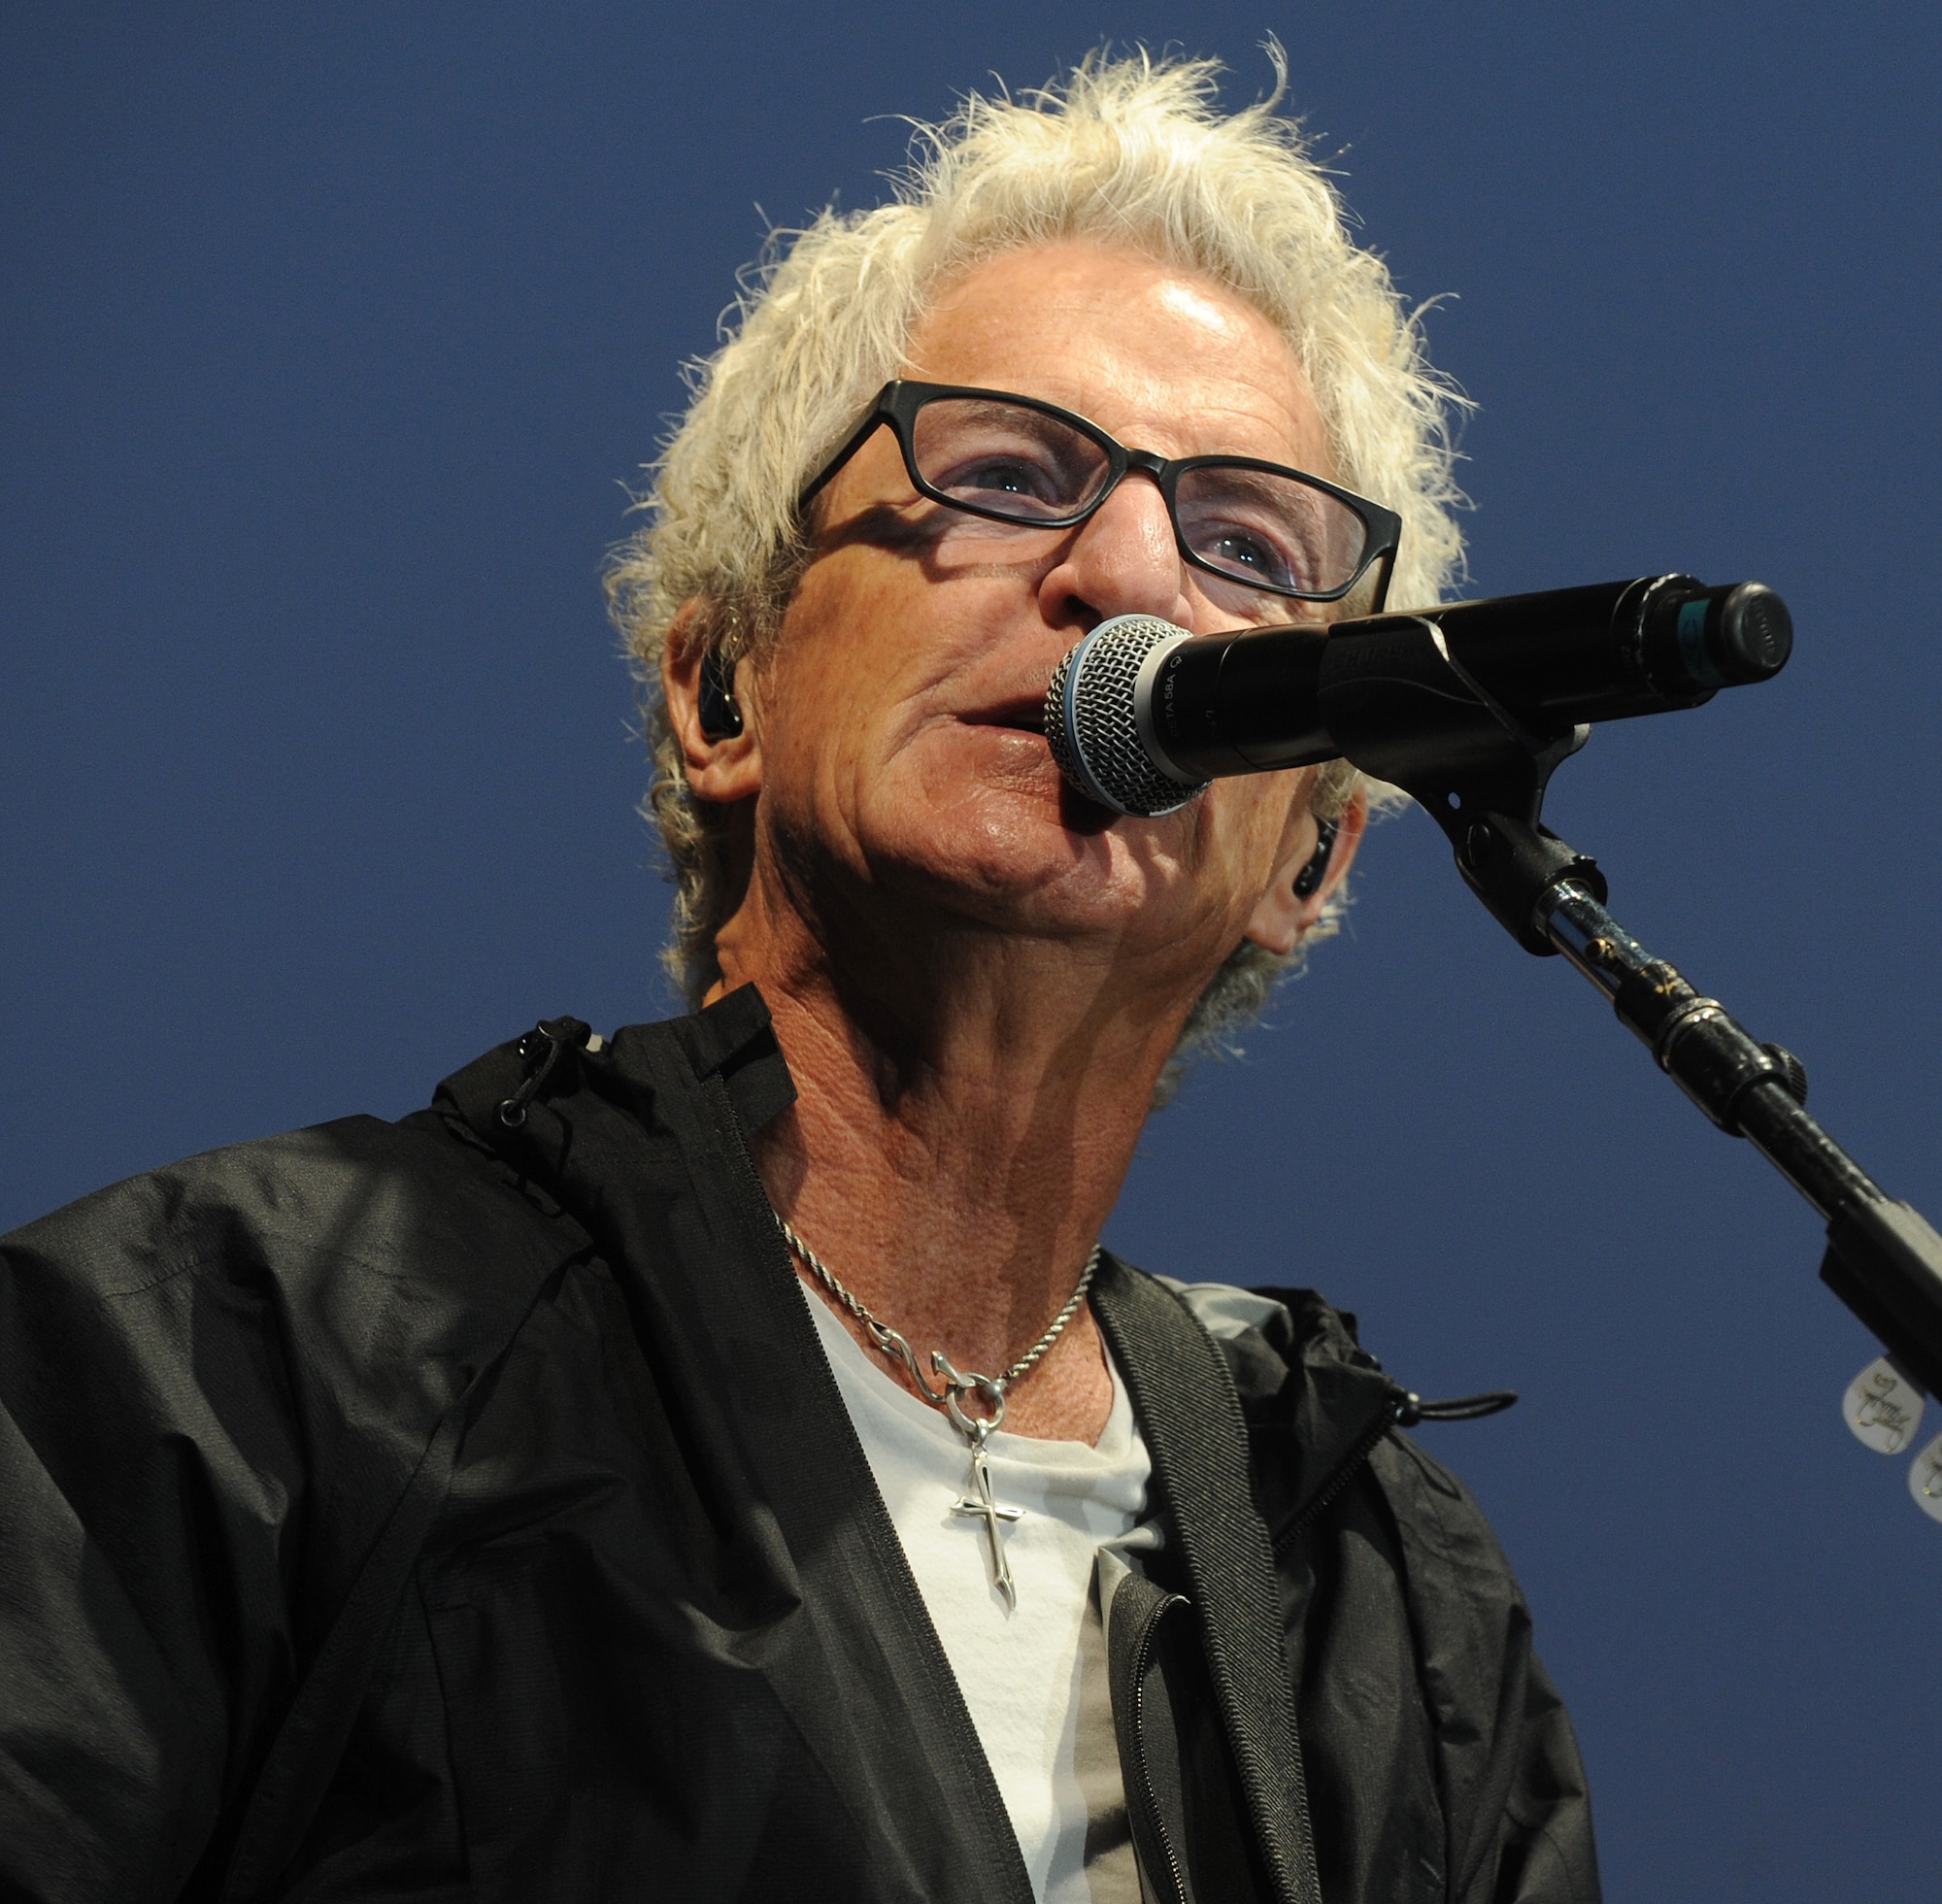 Kevin Cronin, the REO Speedwagon lead vocalist and rhythm guitarist, sings during a performance for an audience primarily made up of America’s veterans and the Spokane community at the Spokane Interstate Fair in Spokane, Washington, Sept. 11, 2014. REO Speedwagon has played on a number of military bases over the years and performances like these allow them to give back to those who have given so much. (U.S. Air Force photo by Staff Sgt. Samantha Krolikowski/Released)